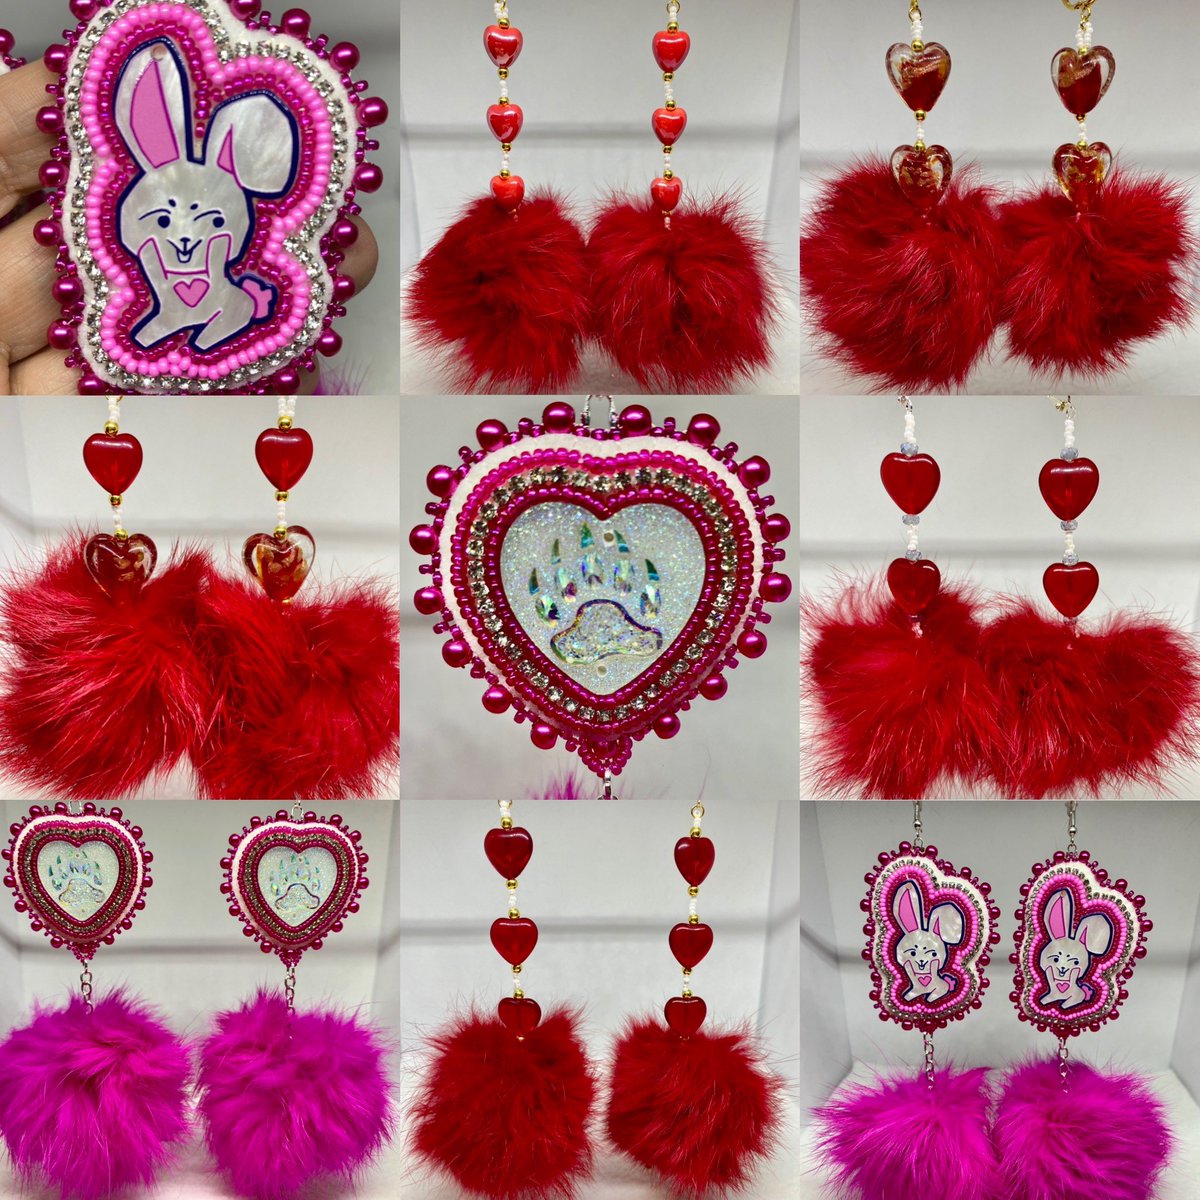 $45-$95 surprise! More Valentine’s Day earrings! Lots of rabbit fur Poms! Tell Auntie or snag for yourself💝 @NDNbeadmarket look-beadwork.myshopify.com